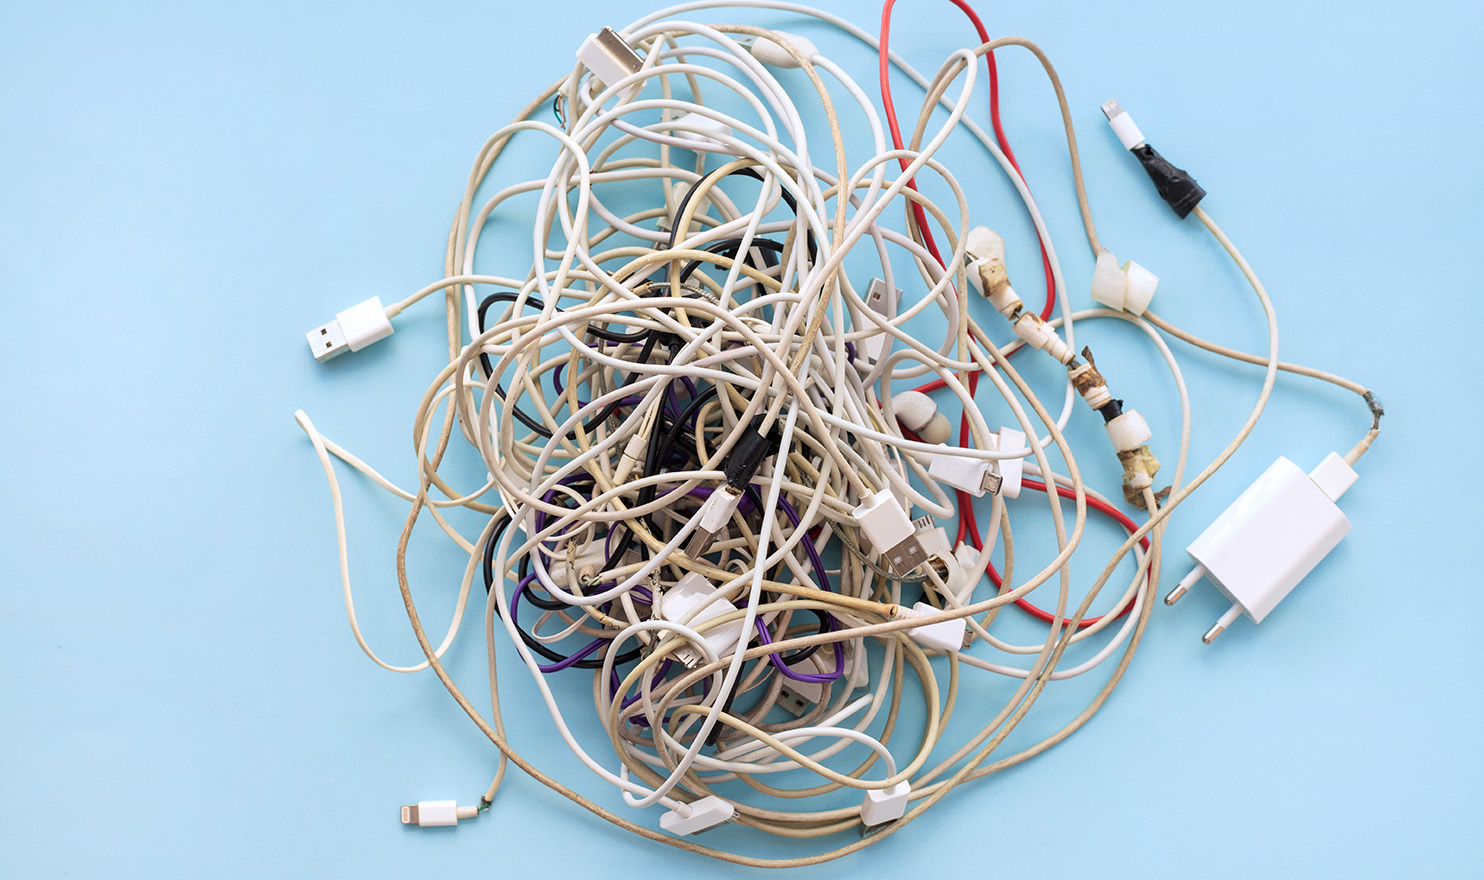 A pile of used and broken chords sits tangled up in a bundle on a blue background.